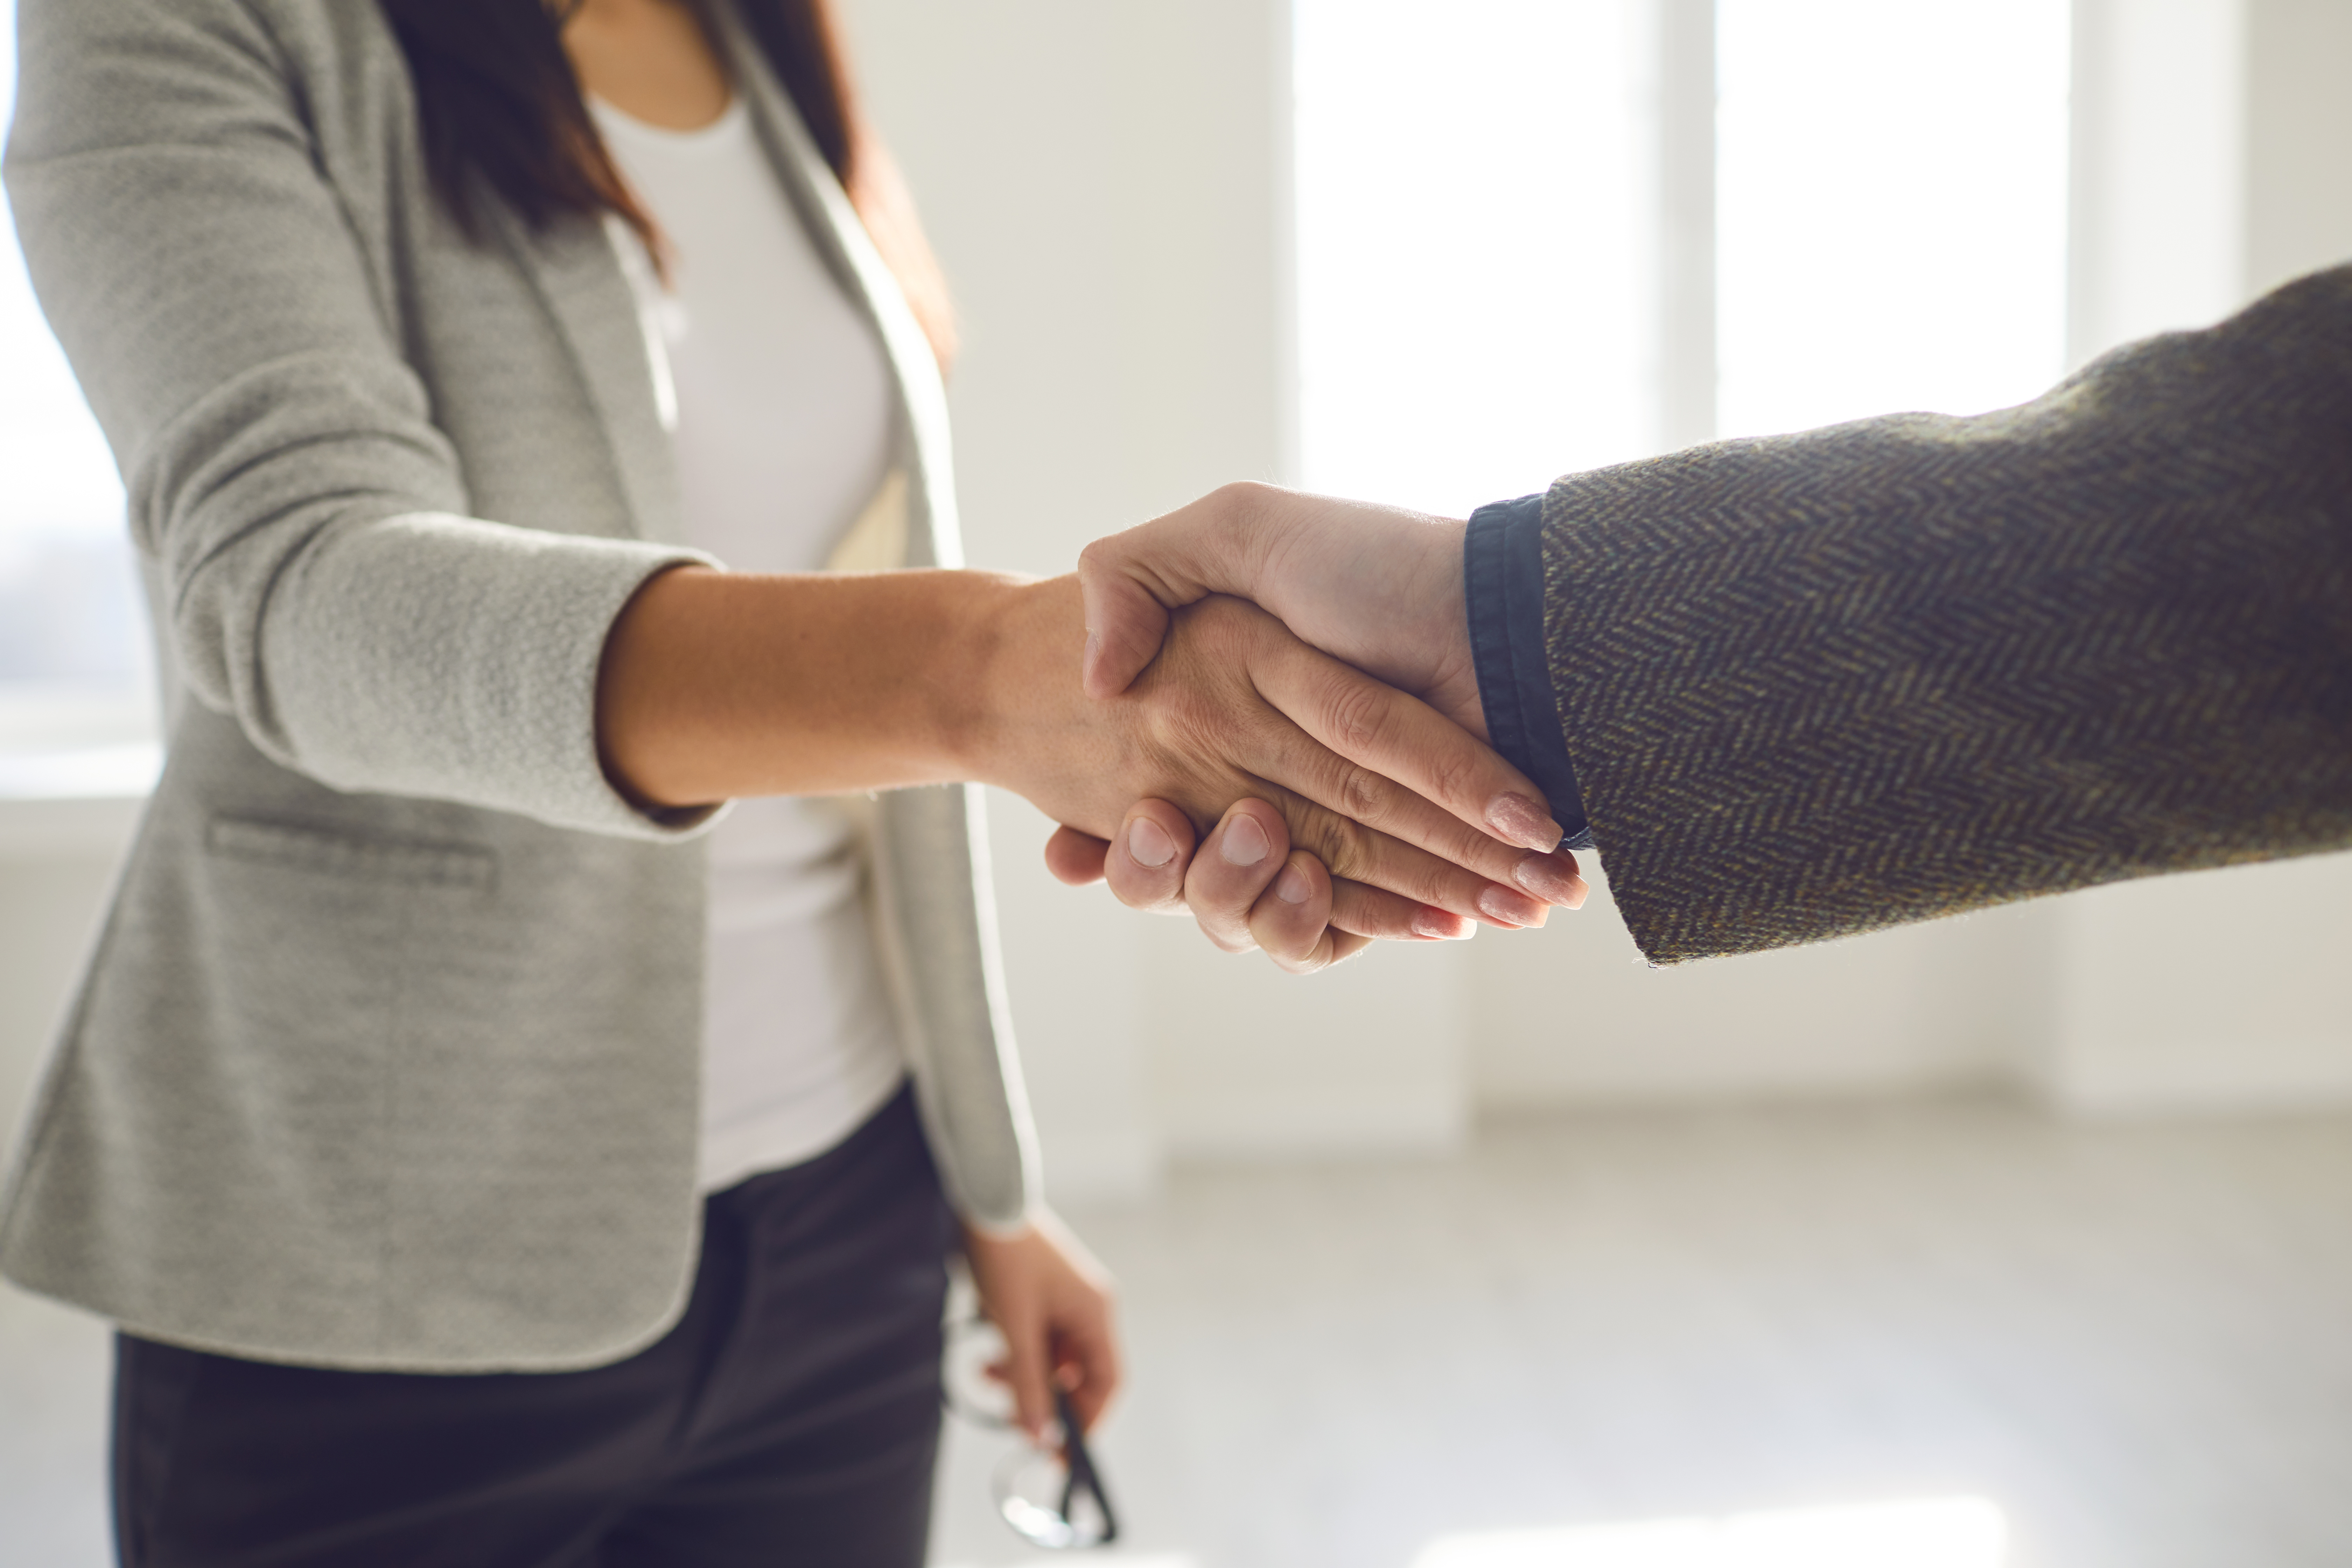 Handshake of businesspeople. Female and male hand makes a handshake in the office.